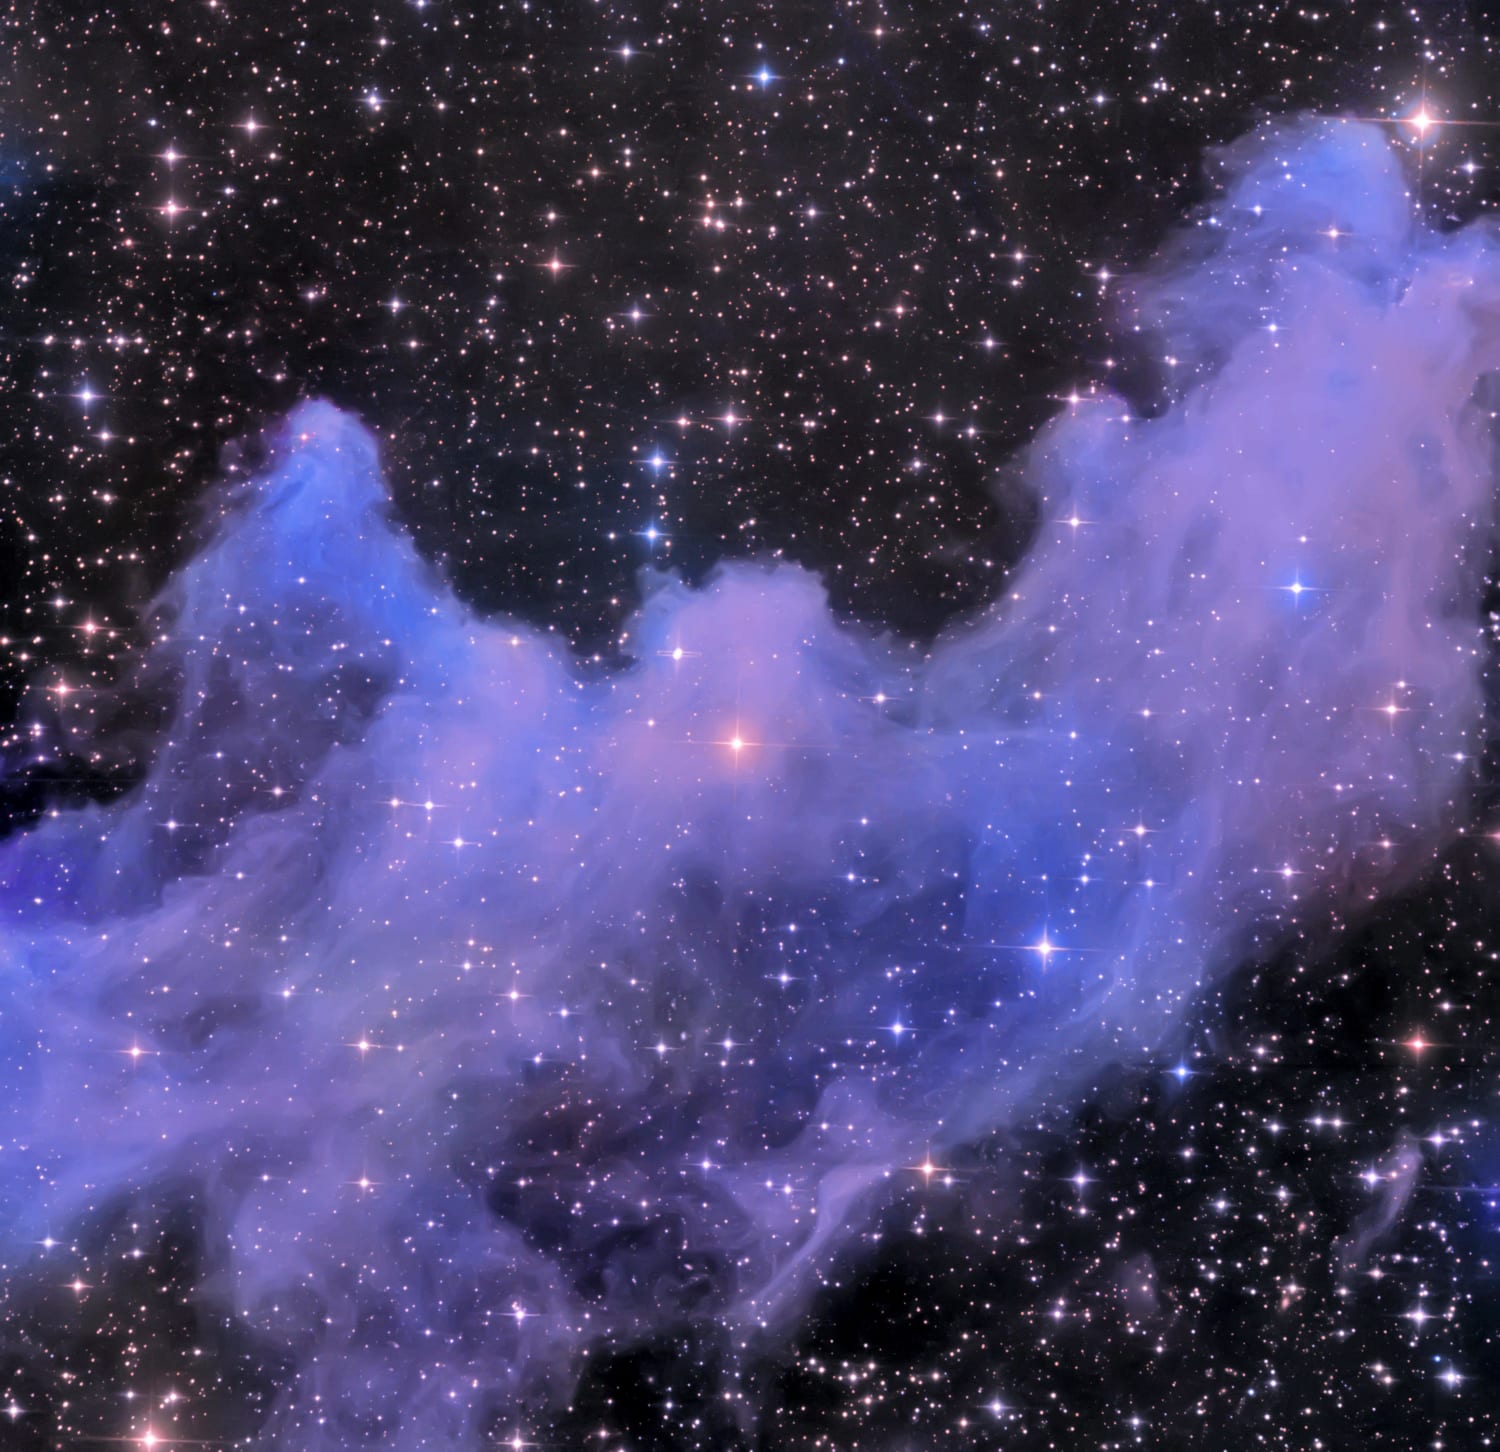 Witch Head Nebula in Full Glory! Shot for around 4.5hrs from dark skies